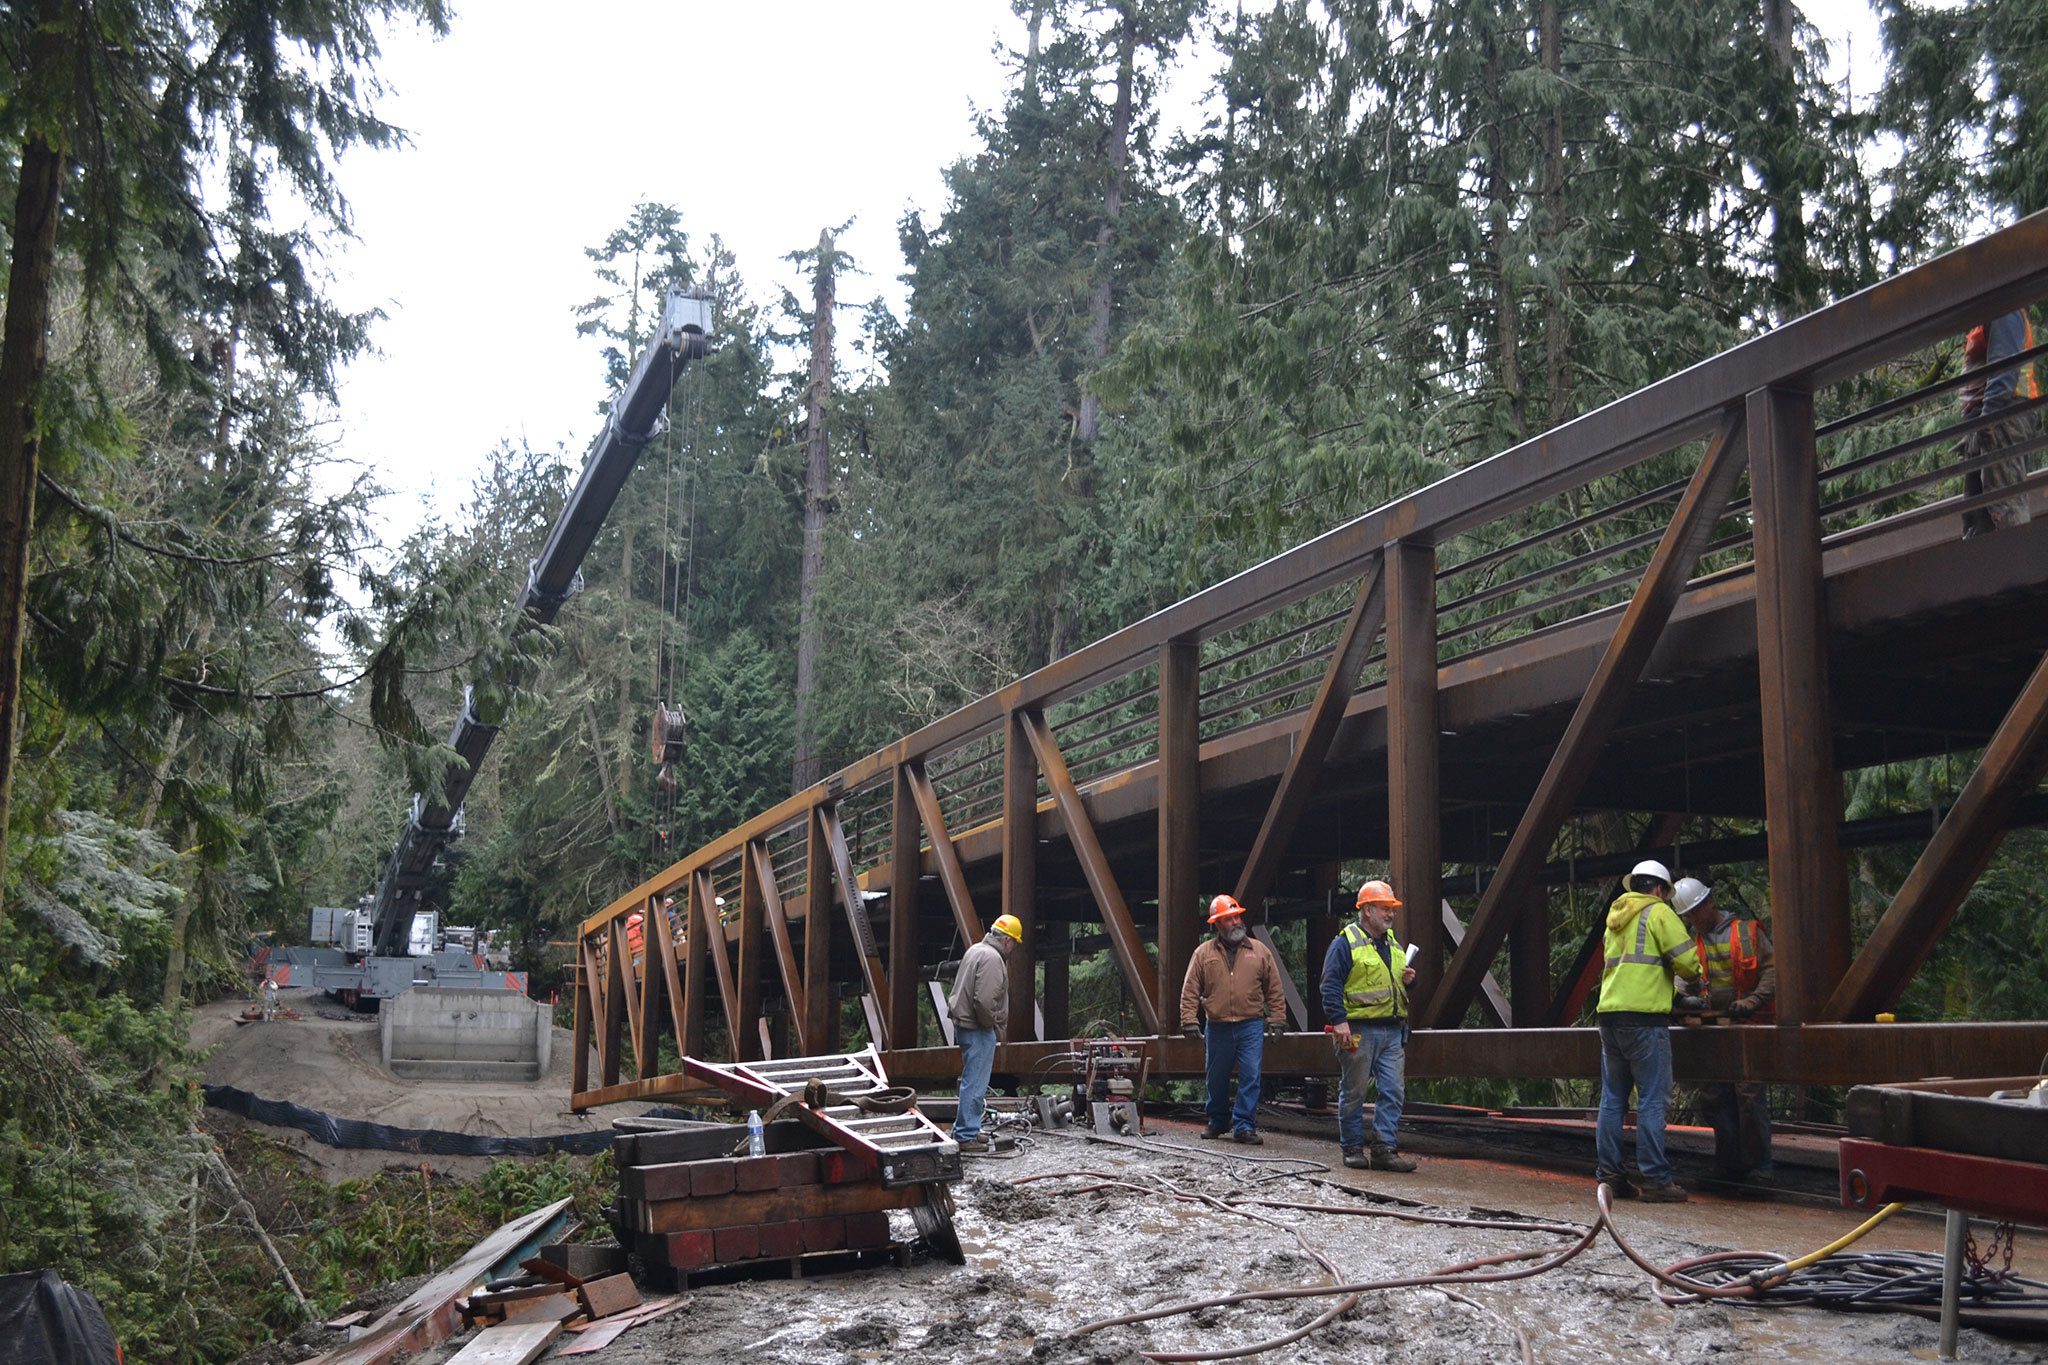 Crews continue work on placing a new bridge in Sequim Bay State Park on Jan. 19. The installation follows a federal injunction to remove culverts that obstruct salmon migration. Sequim Gazette photo by Matthew Nash